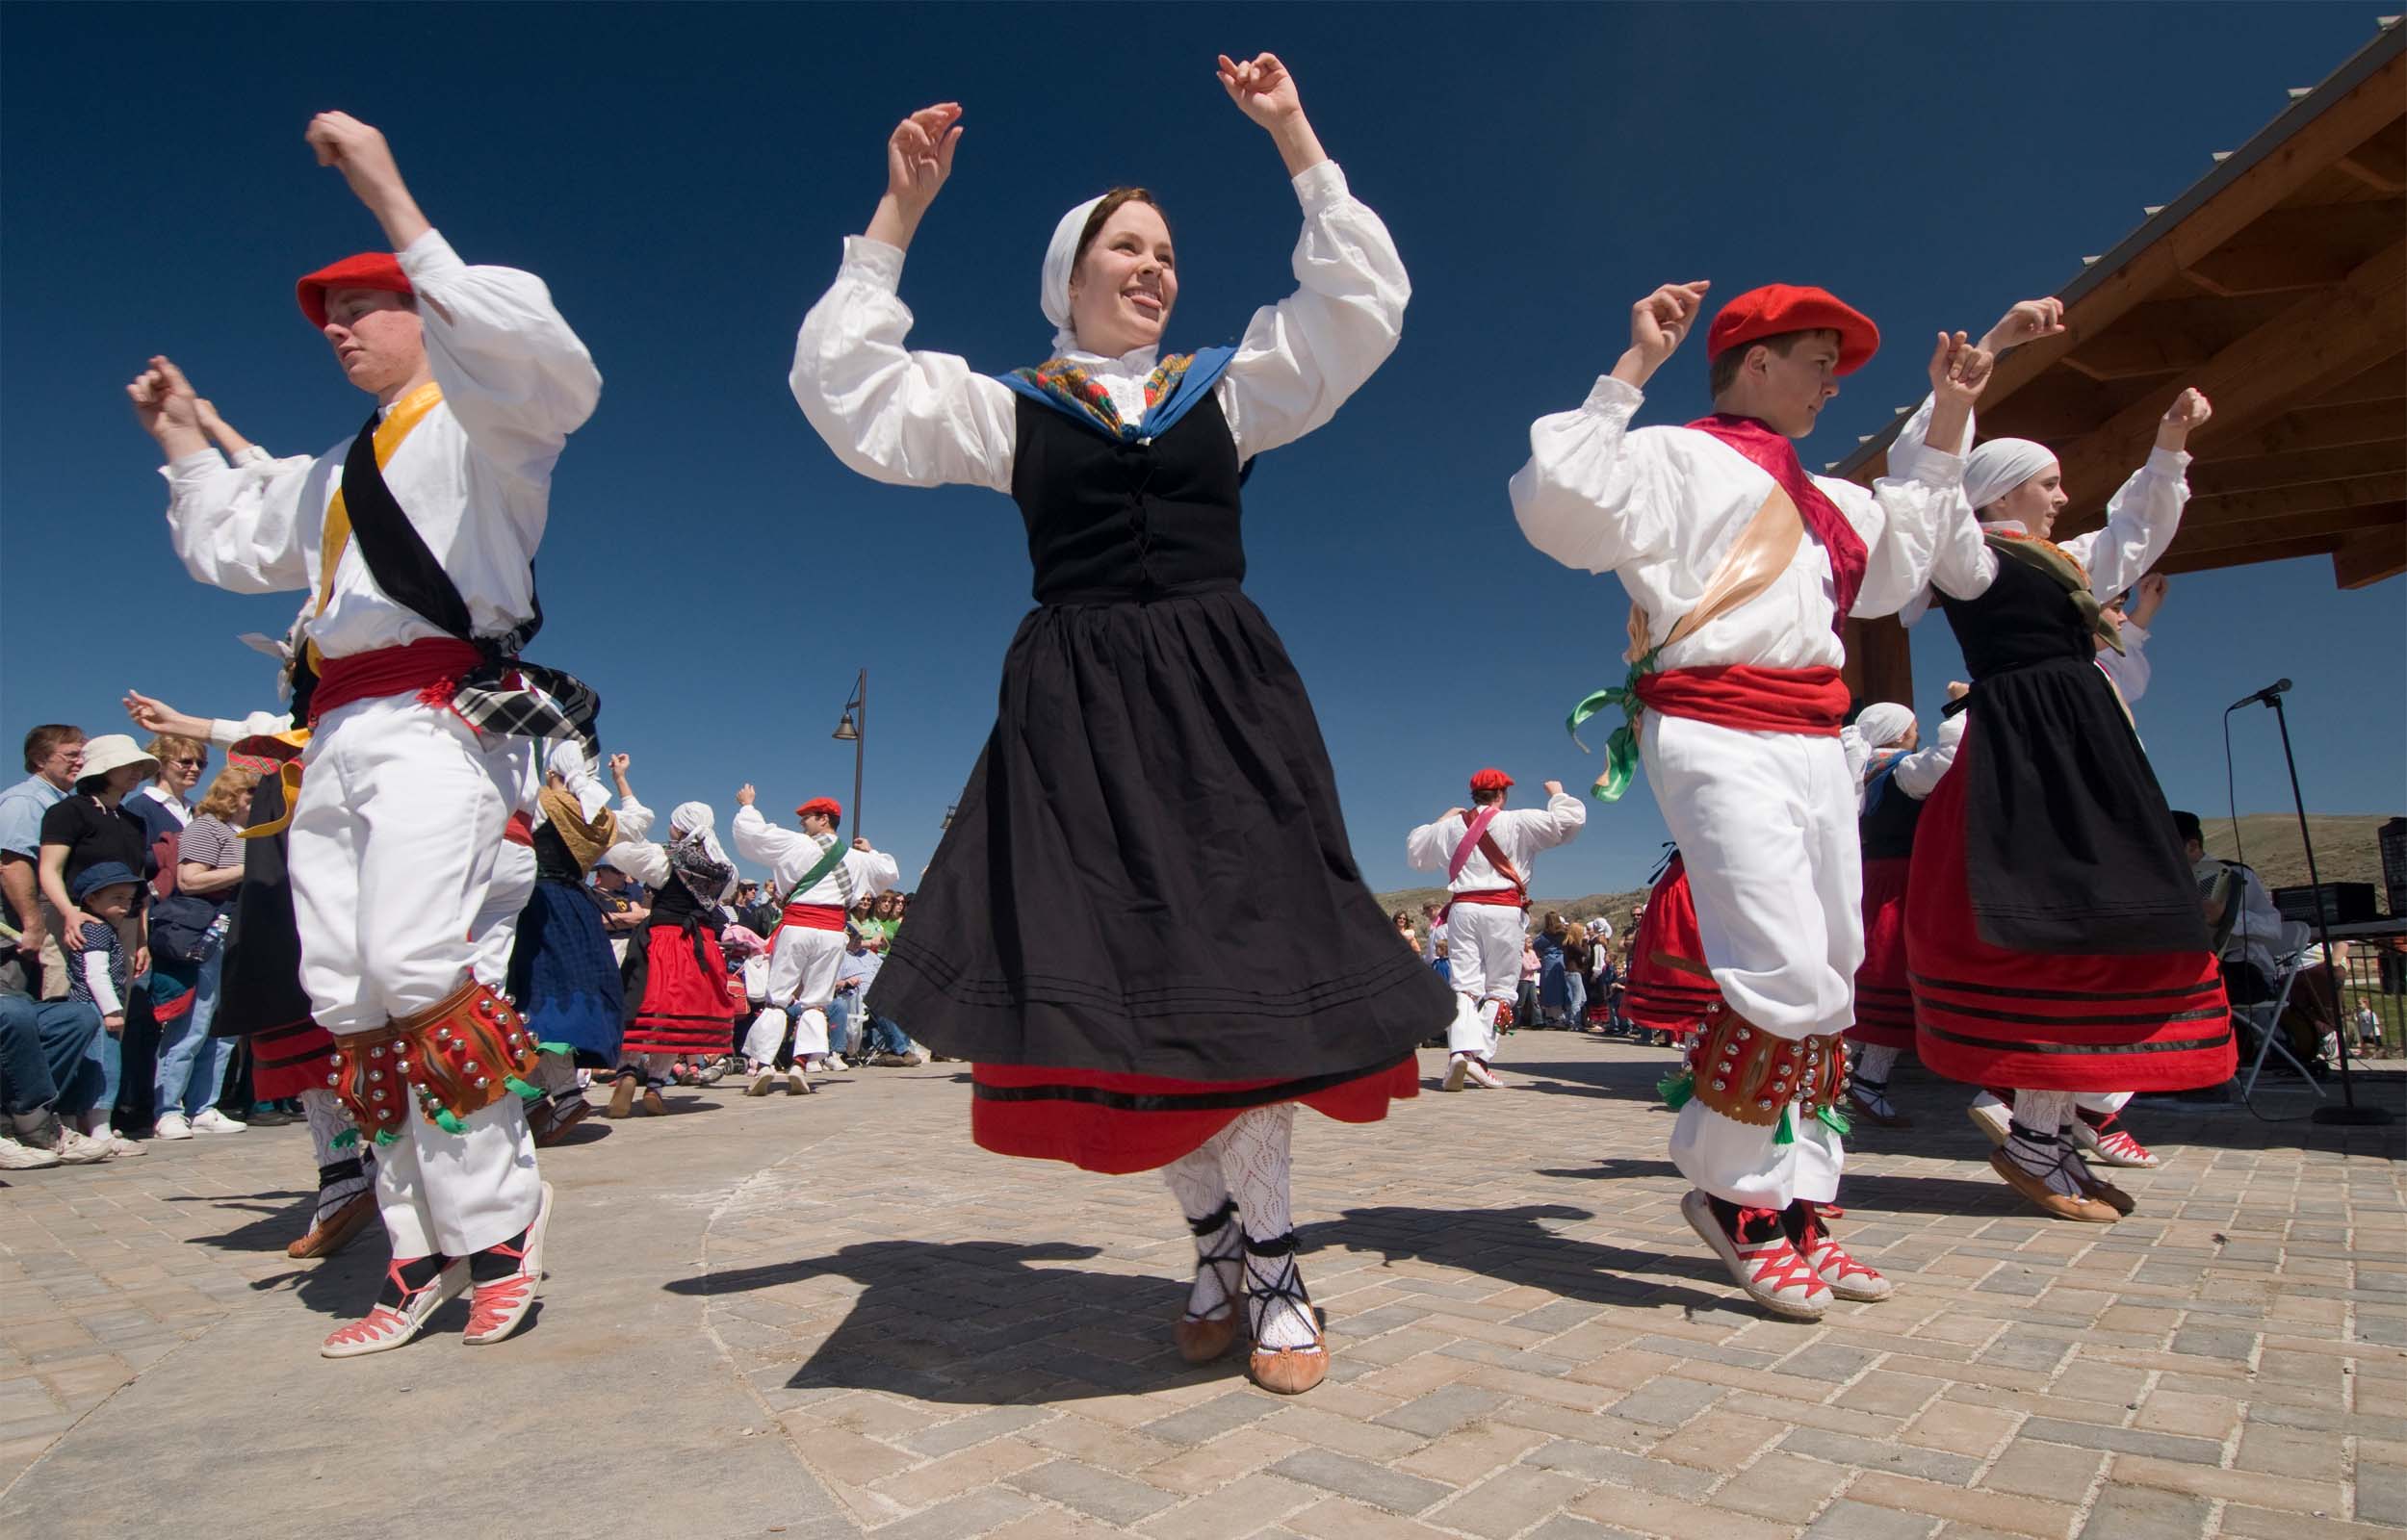 A group of people dancing in traditional Basque outfits in front of an audience at the Jaialdi Festival.